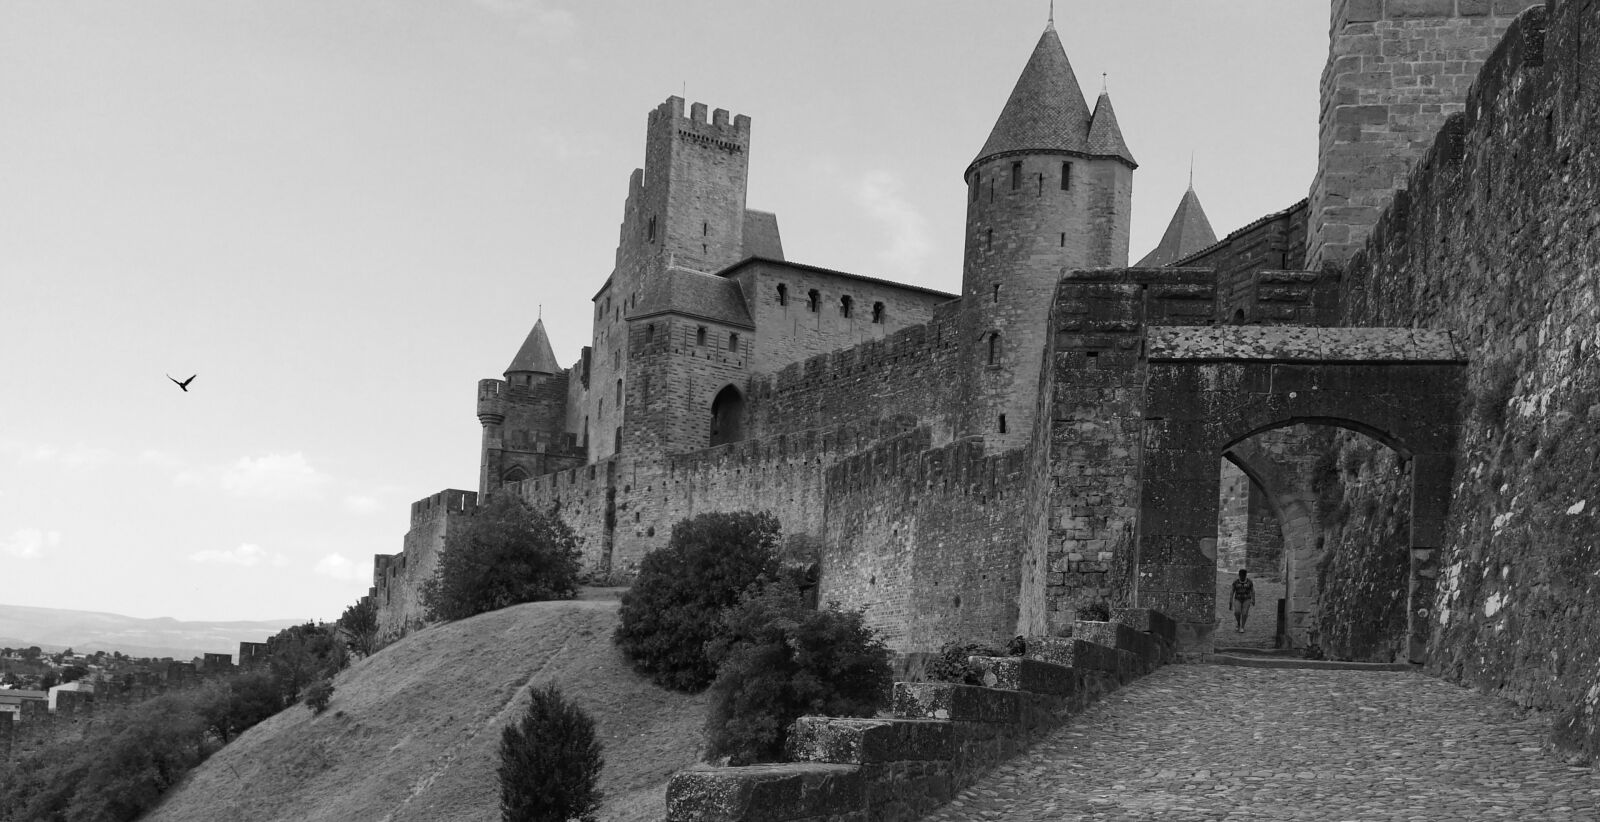 HUAWEI GX8 sample photo. Carcassonne, france, medieval city photography